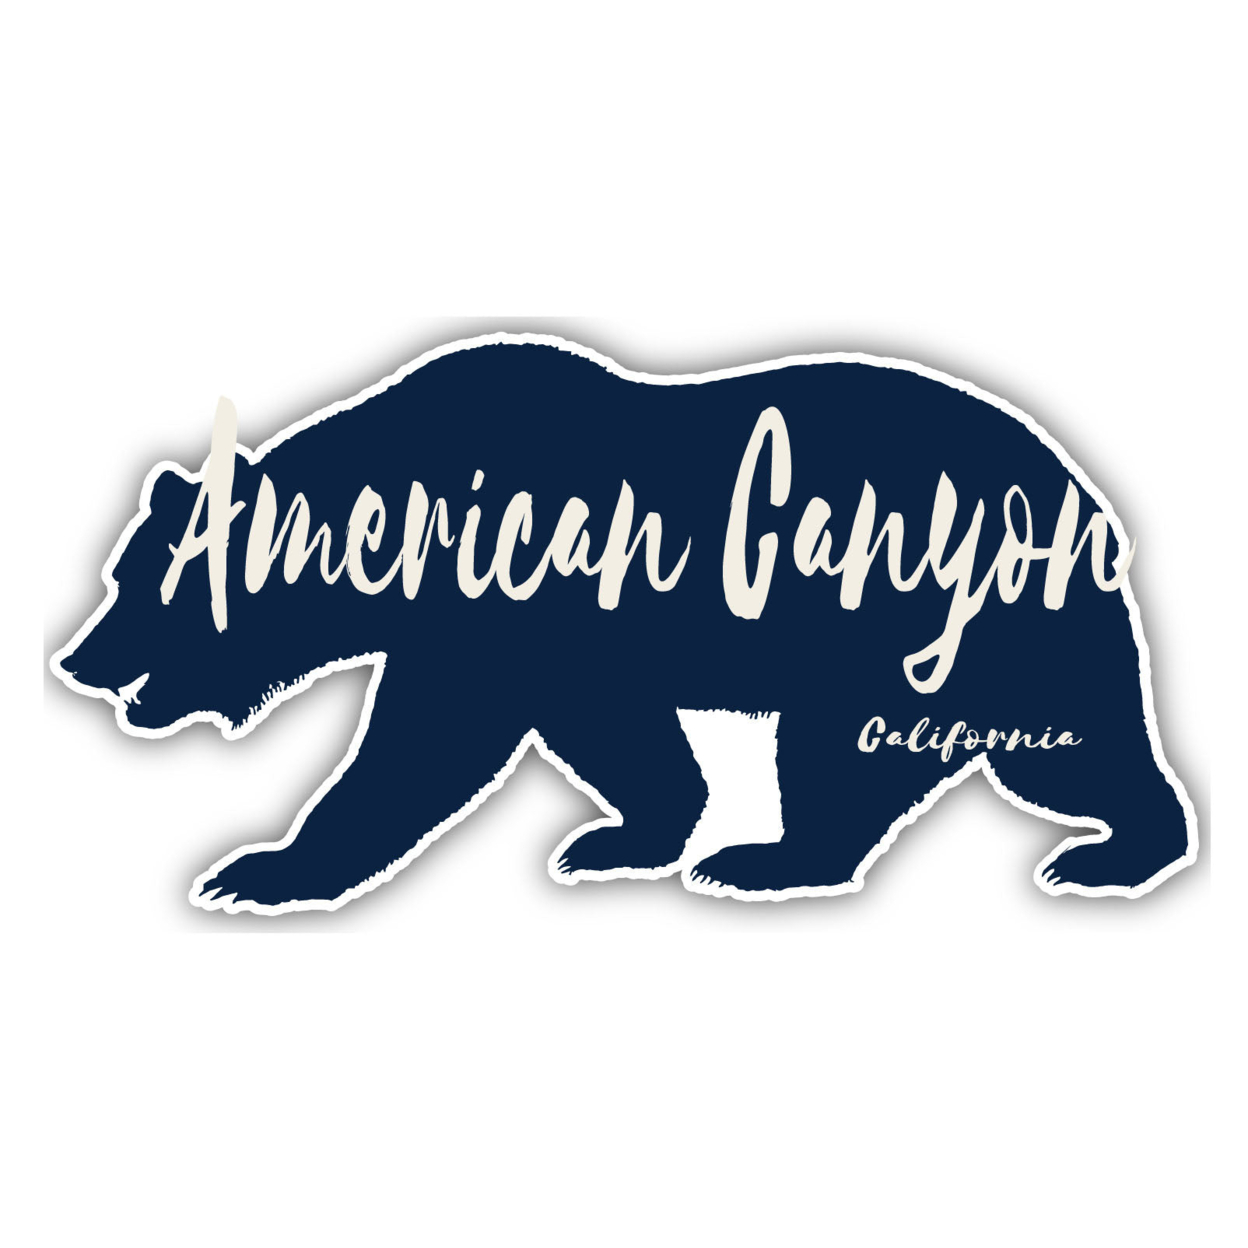 American Canyon California Souvenir Decorative Stickers (Choose Theme And Size) - 4-Pack, 2-Inch, Bear